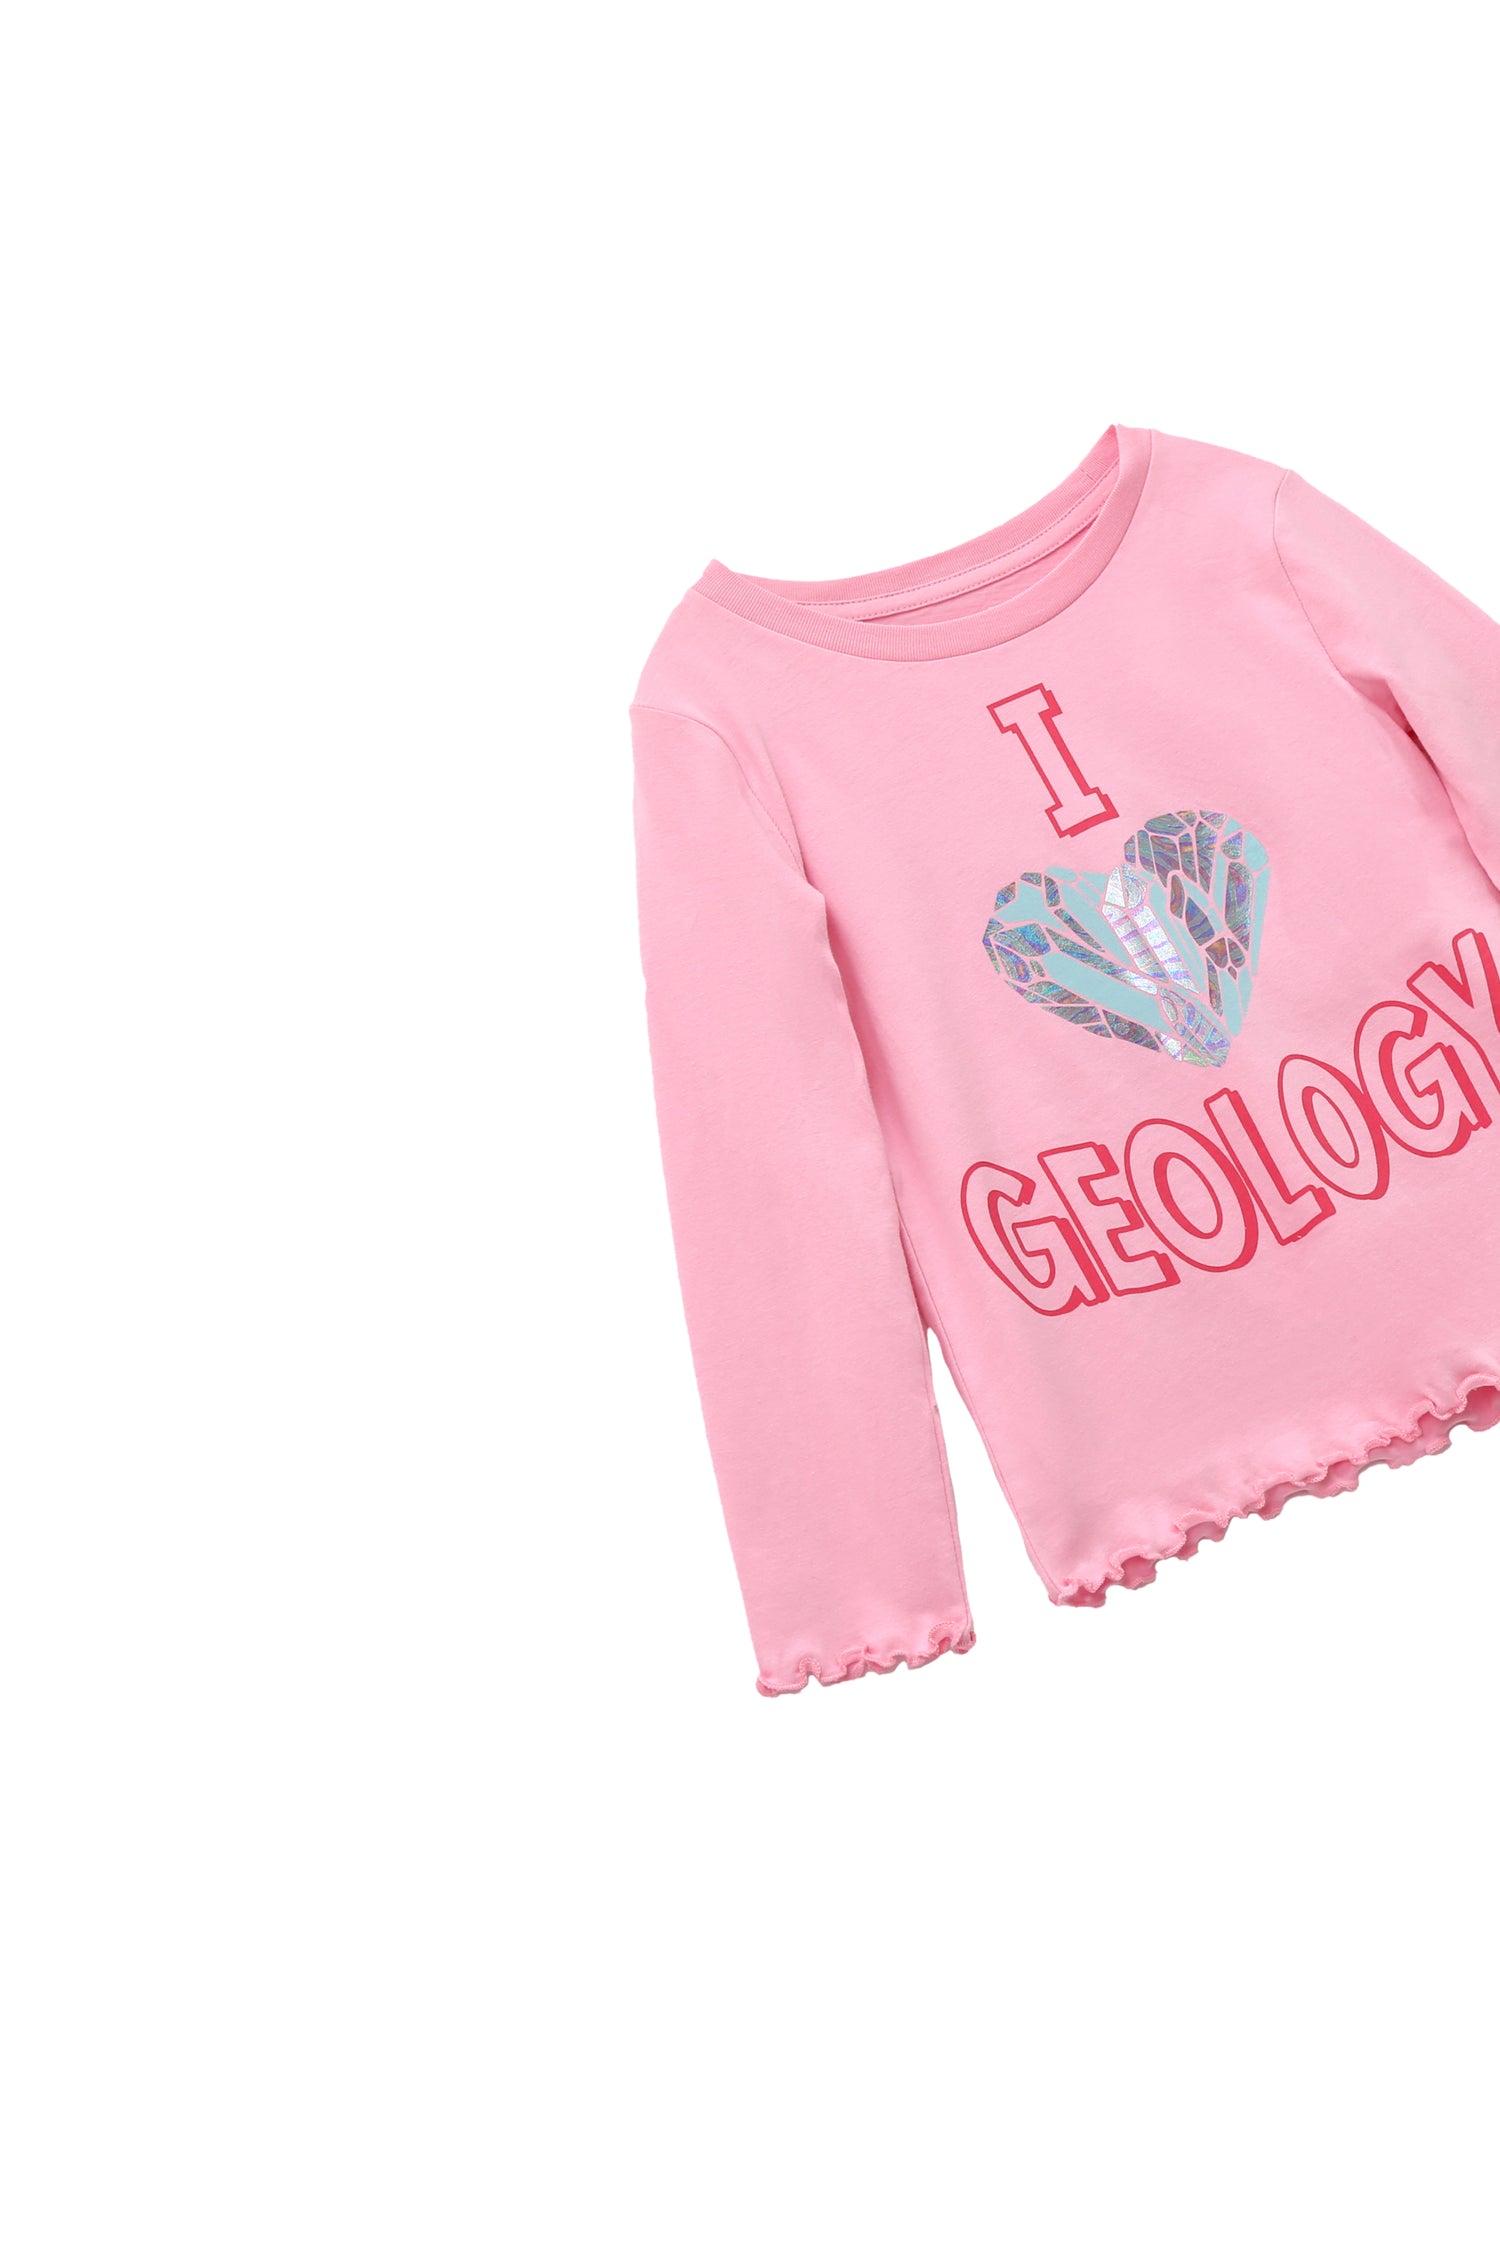 CLOSE UP OF PINK LONG SLEEVE T-SHIRT WITH I HEART GEOLOGY IRIDESCENT GRAPHICS